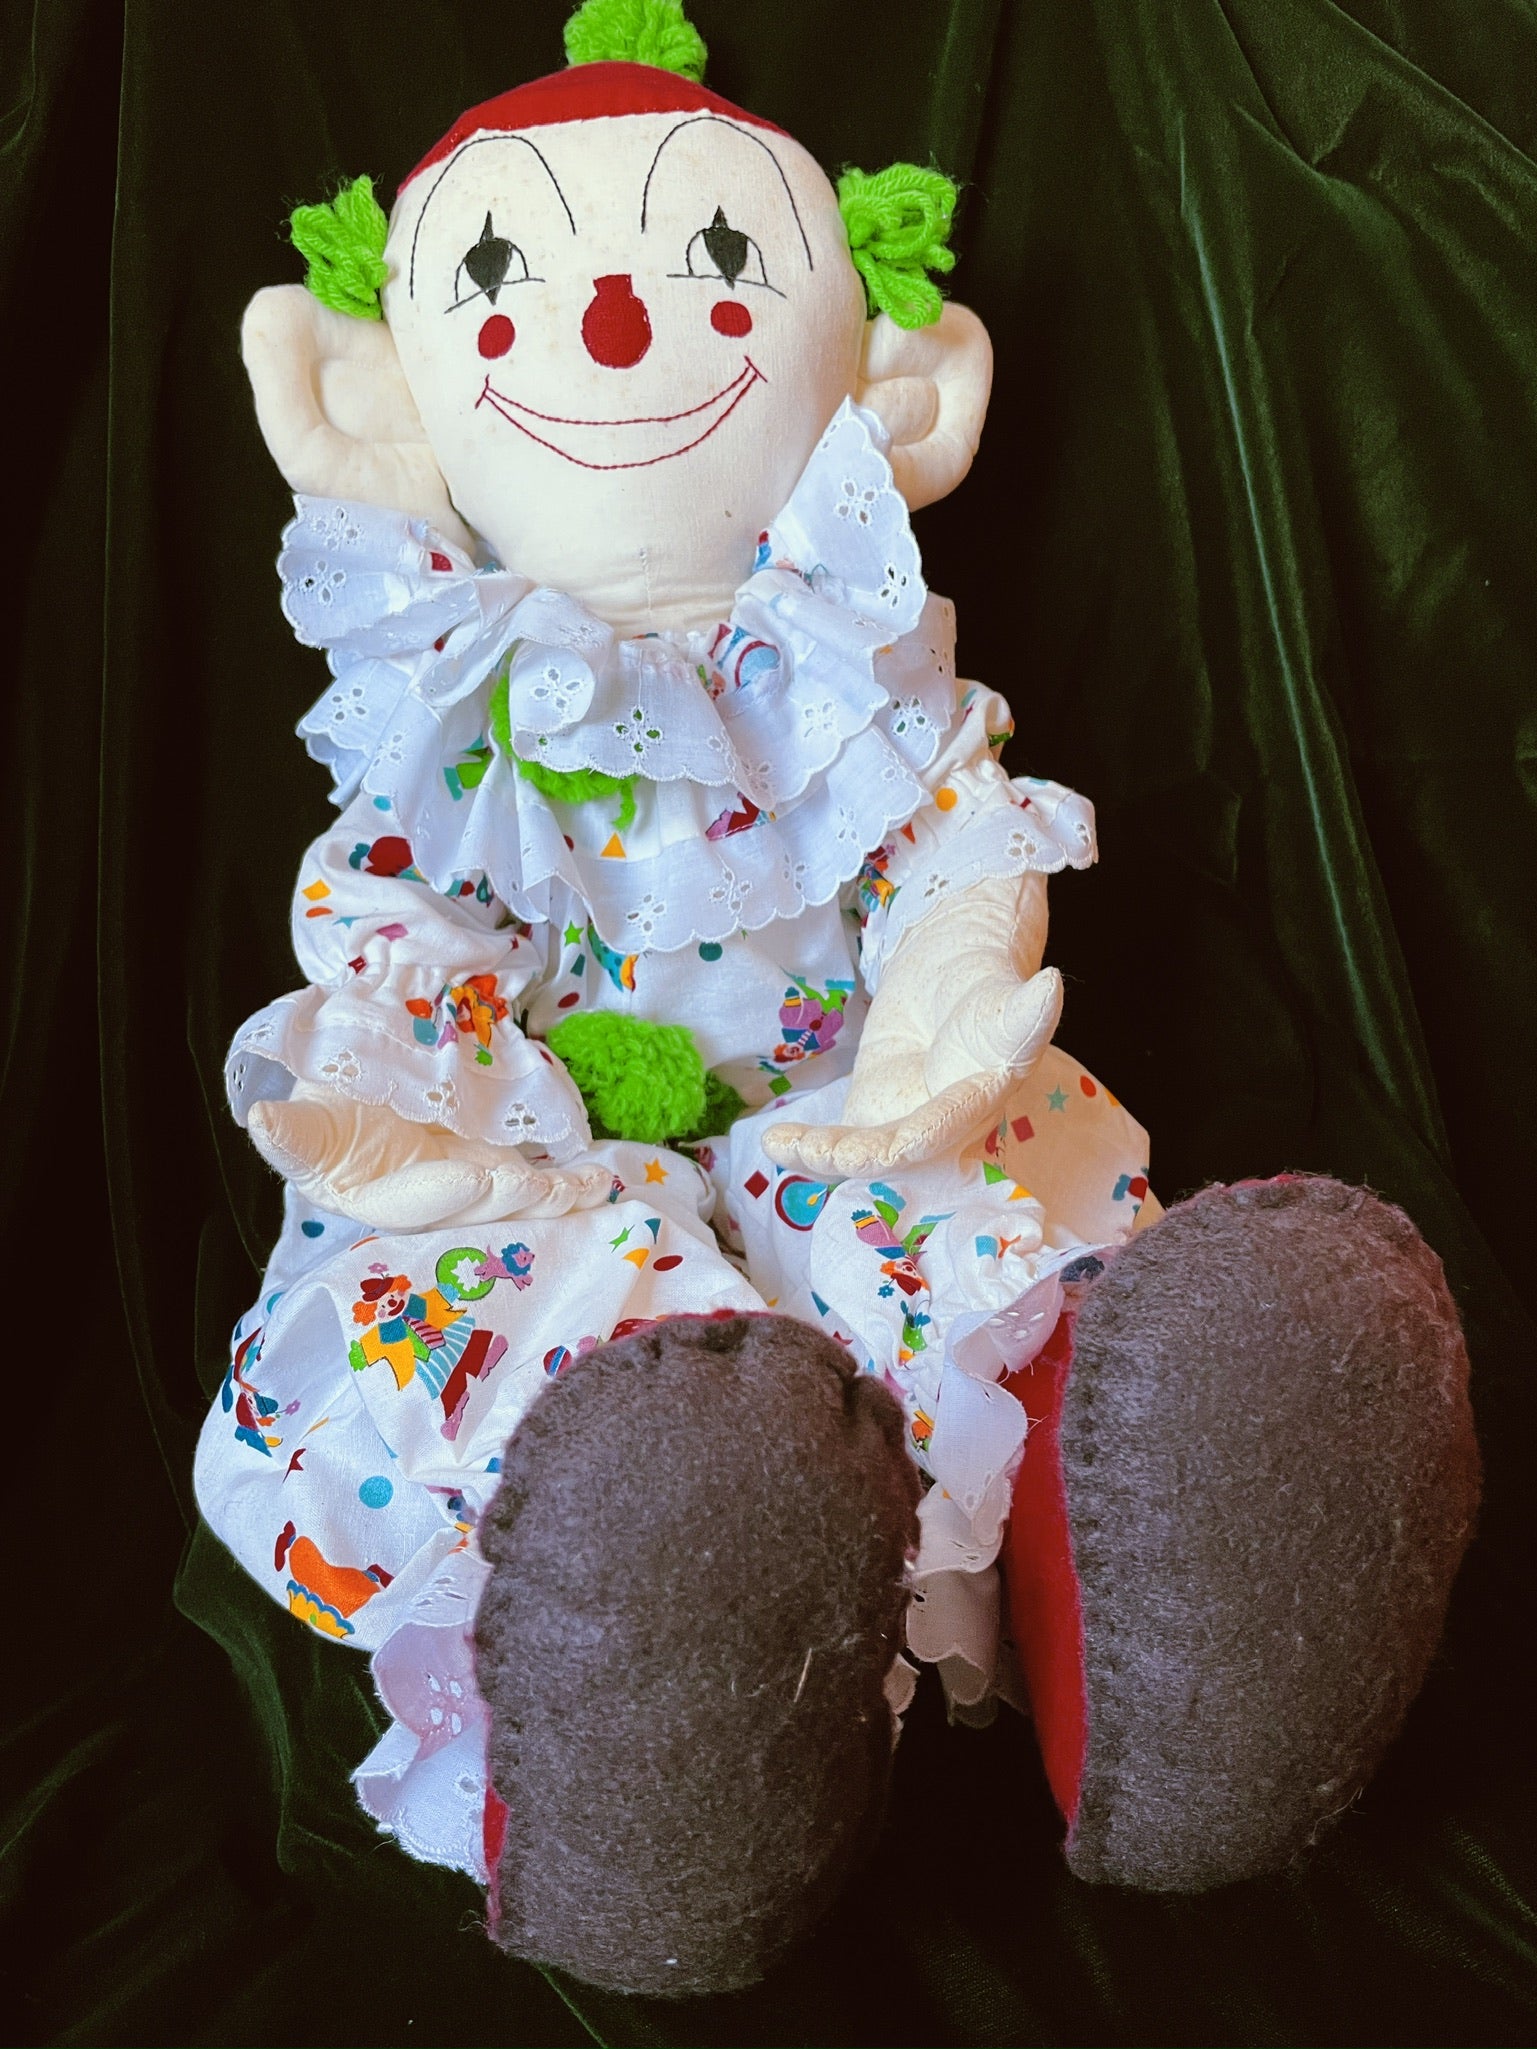 Vintage Hand-Made Clown Doll